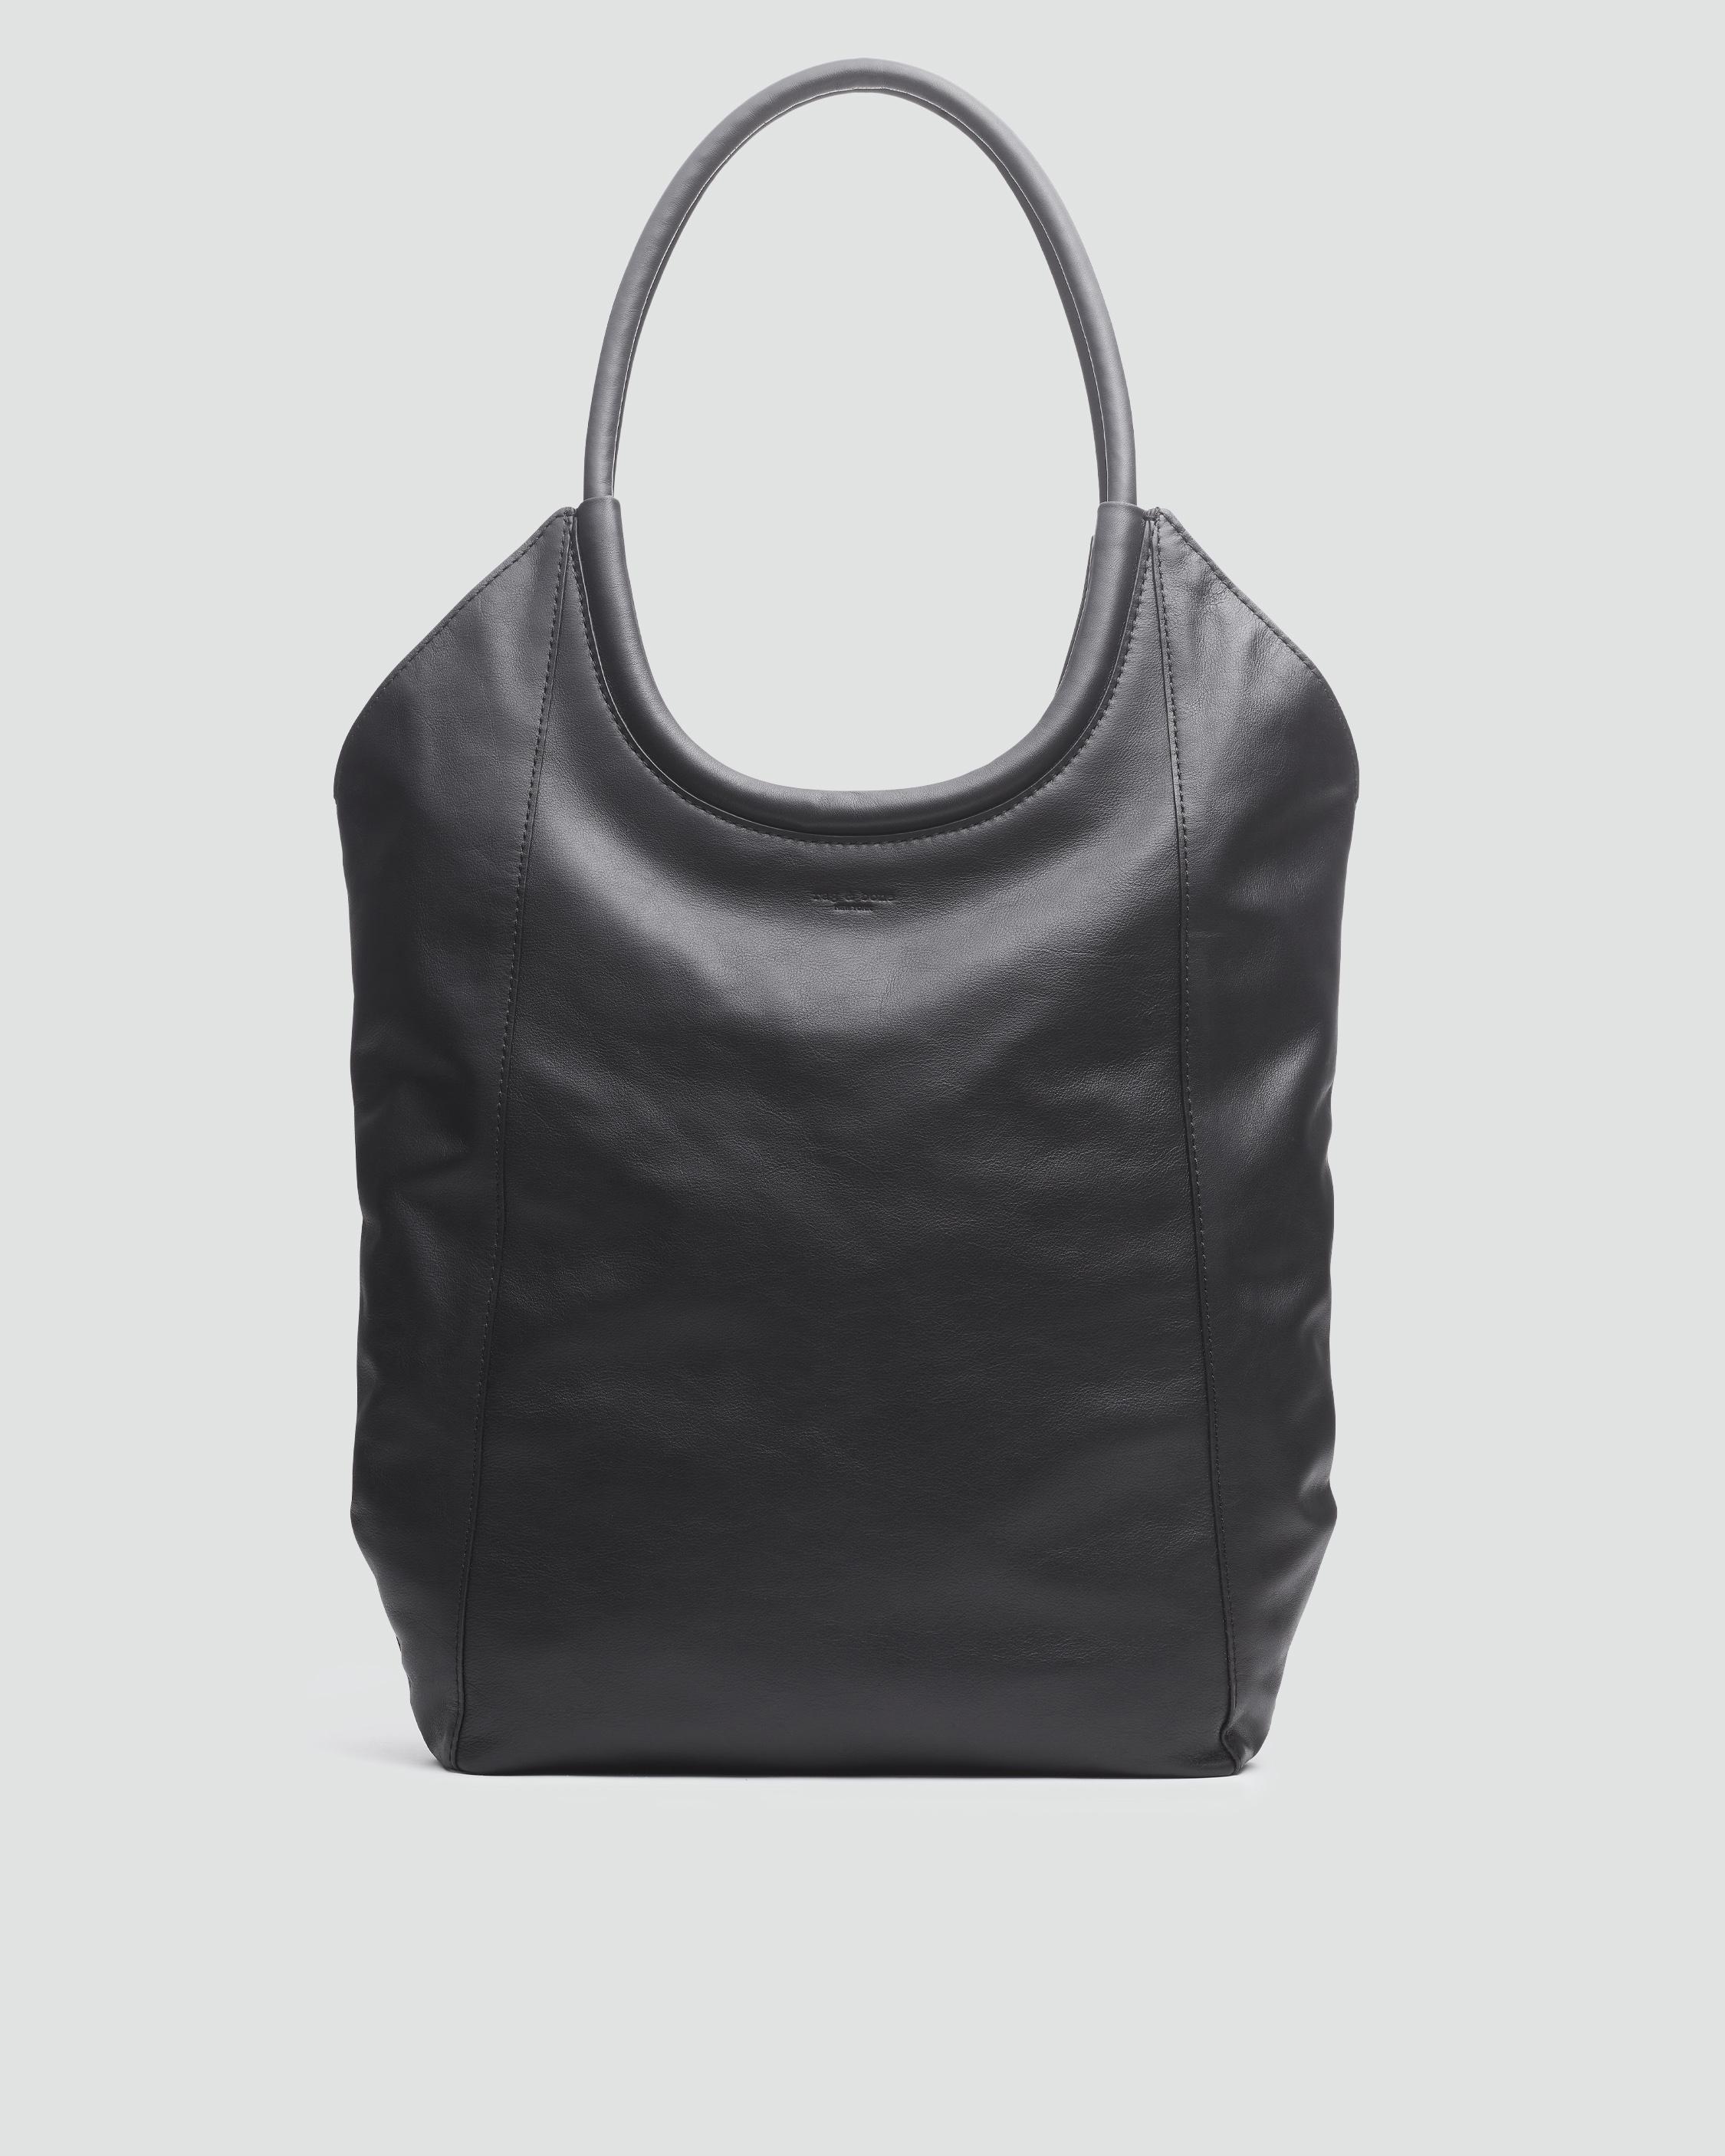 Zara Womens Shoulder Bags, Black, Inventory Confirmation Required